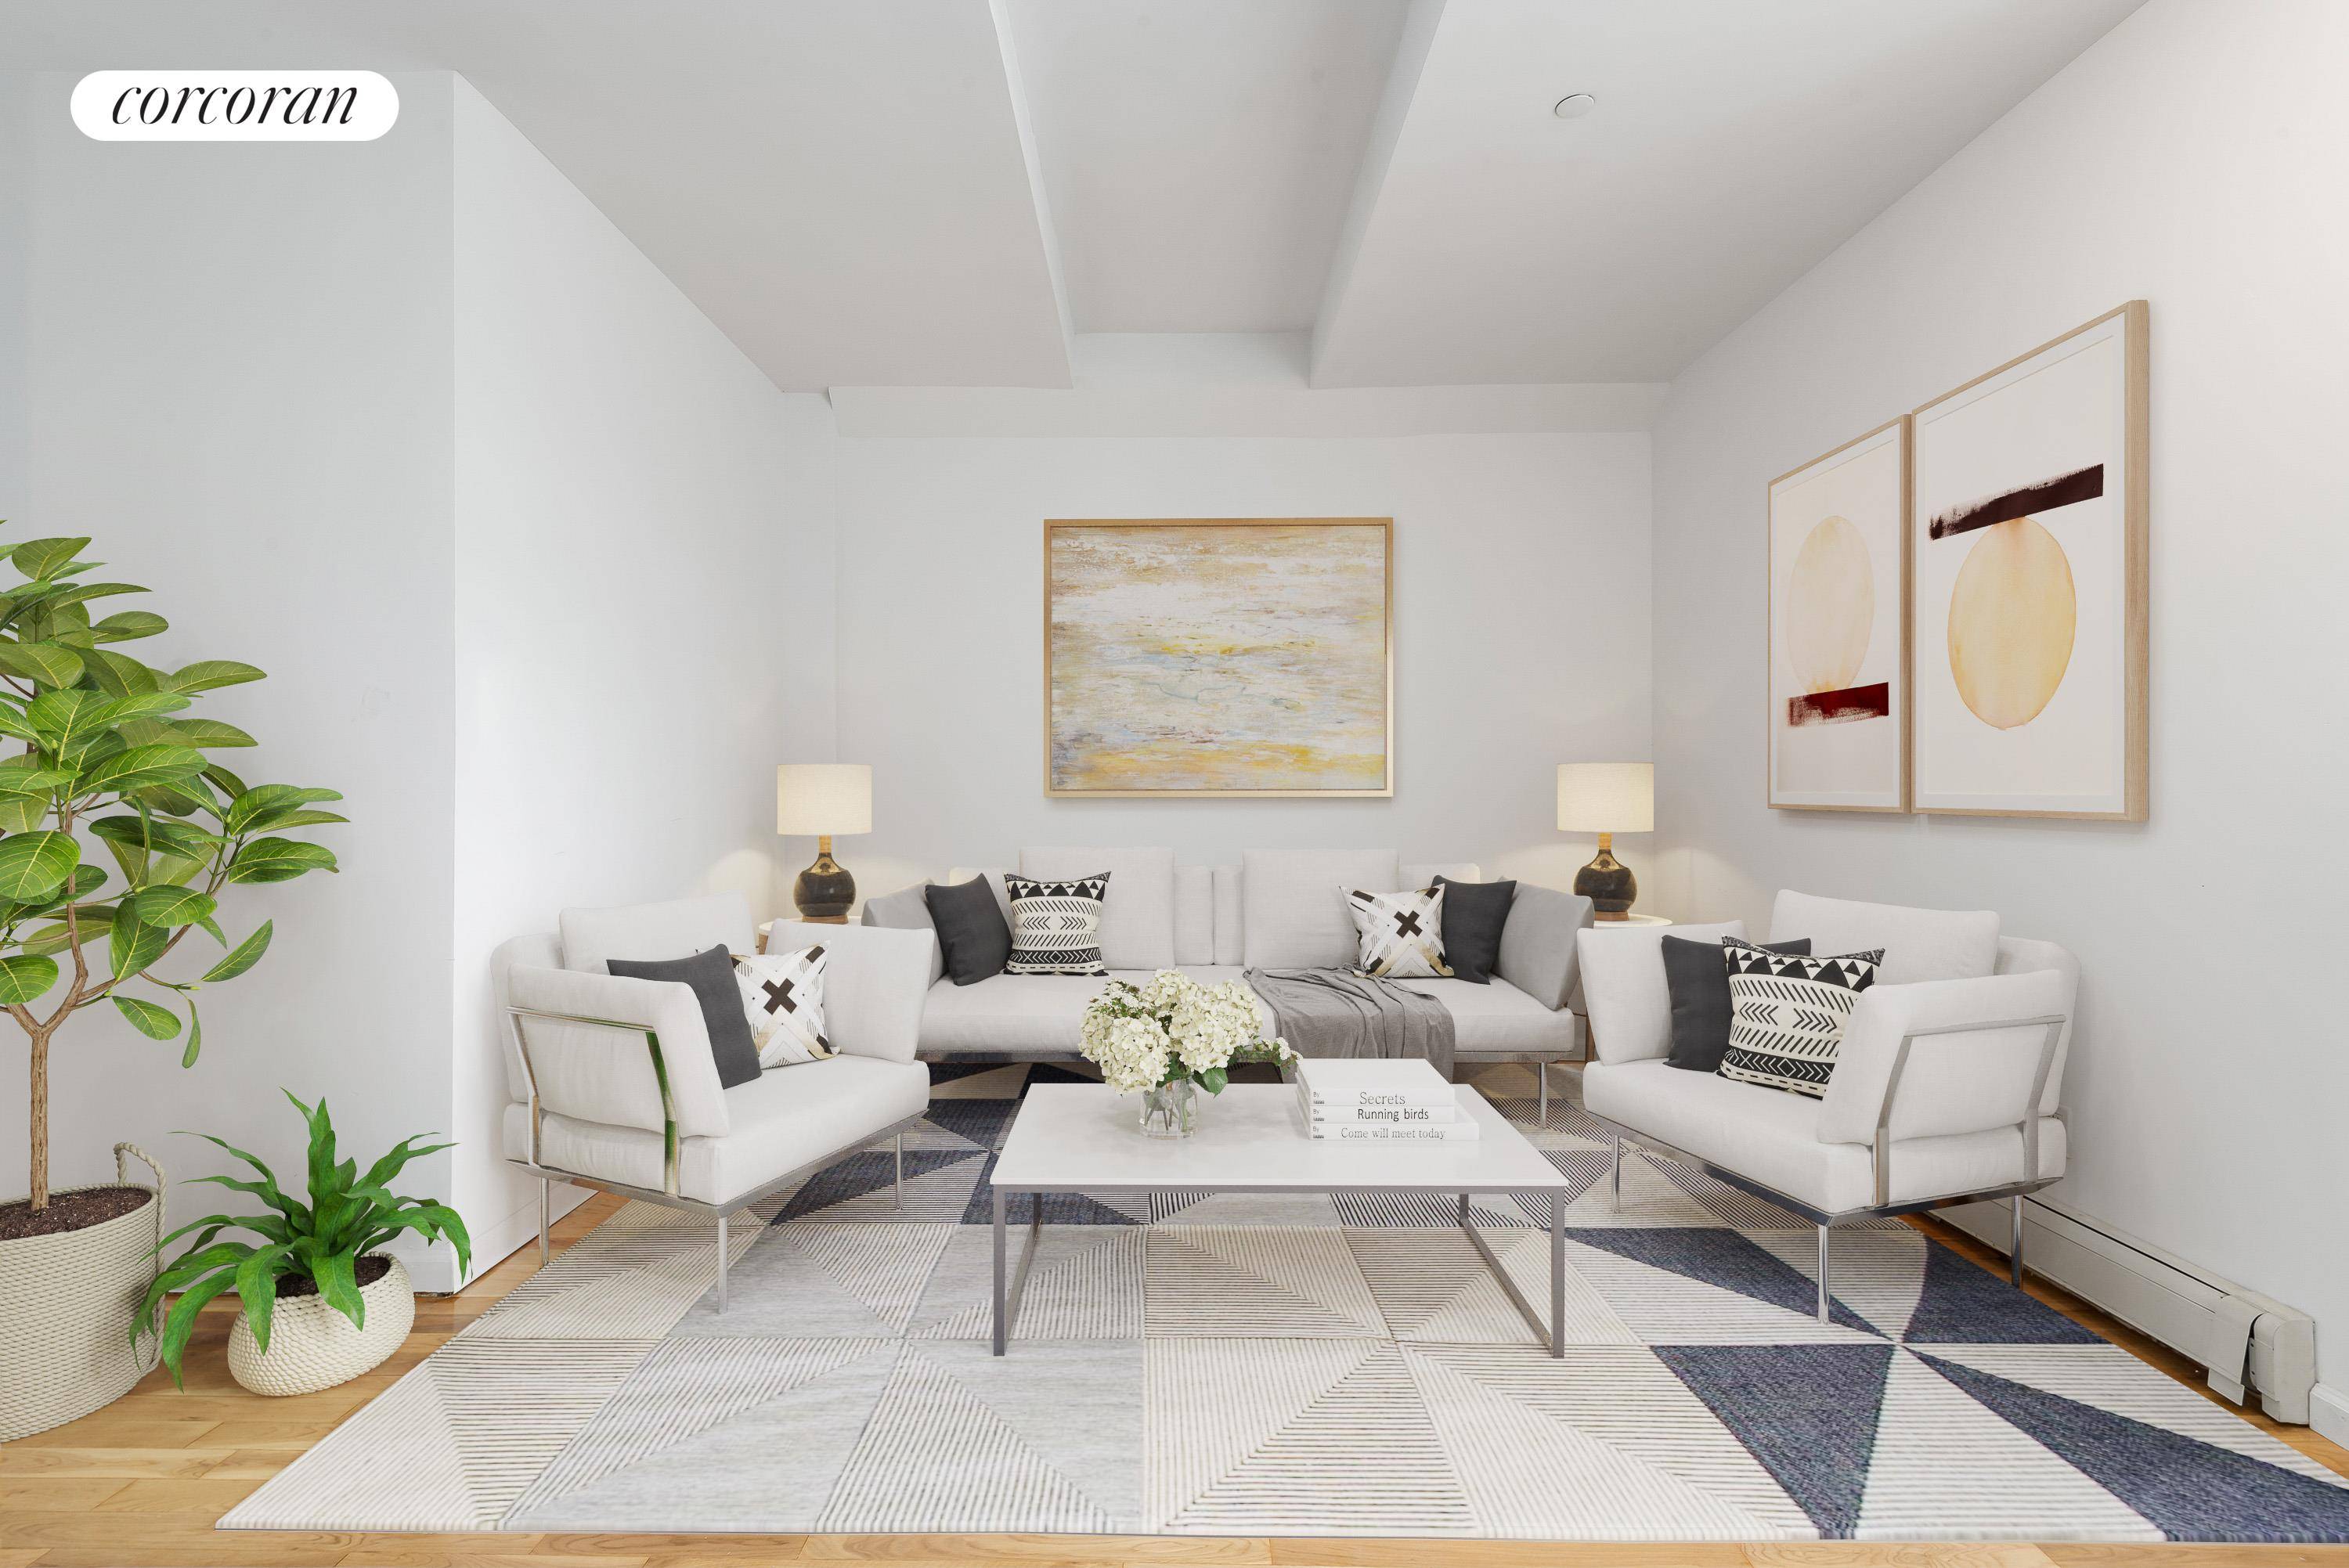 Welcome to 422 49th Street 4F, a spacious 3 bedroom, 2 full bath duplex in Sunset Park, Brooklyn.